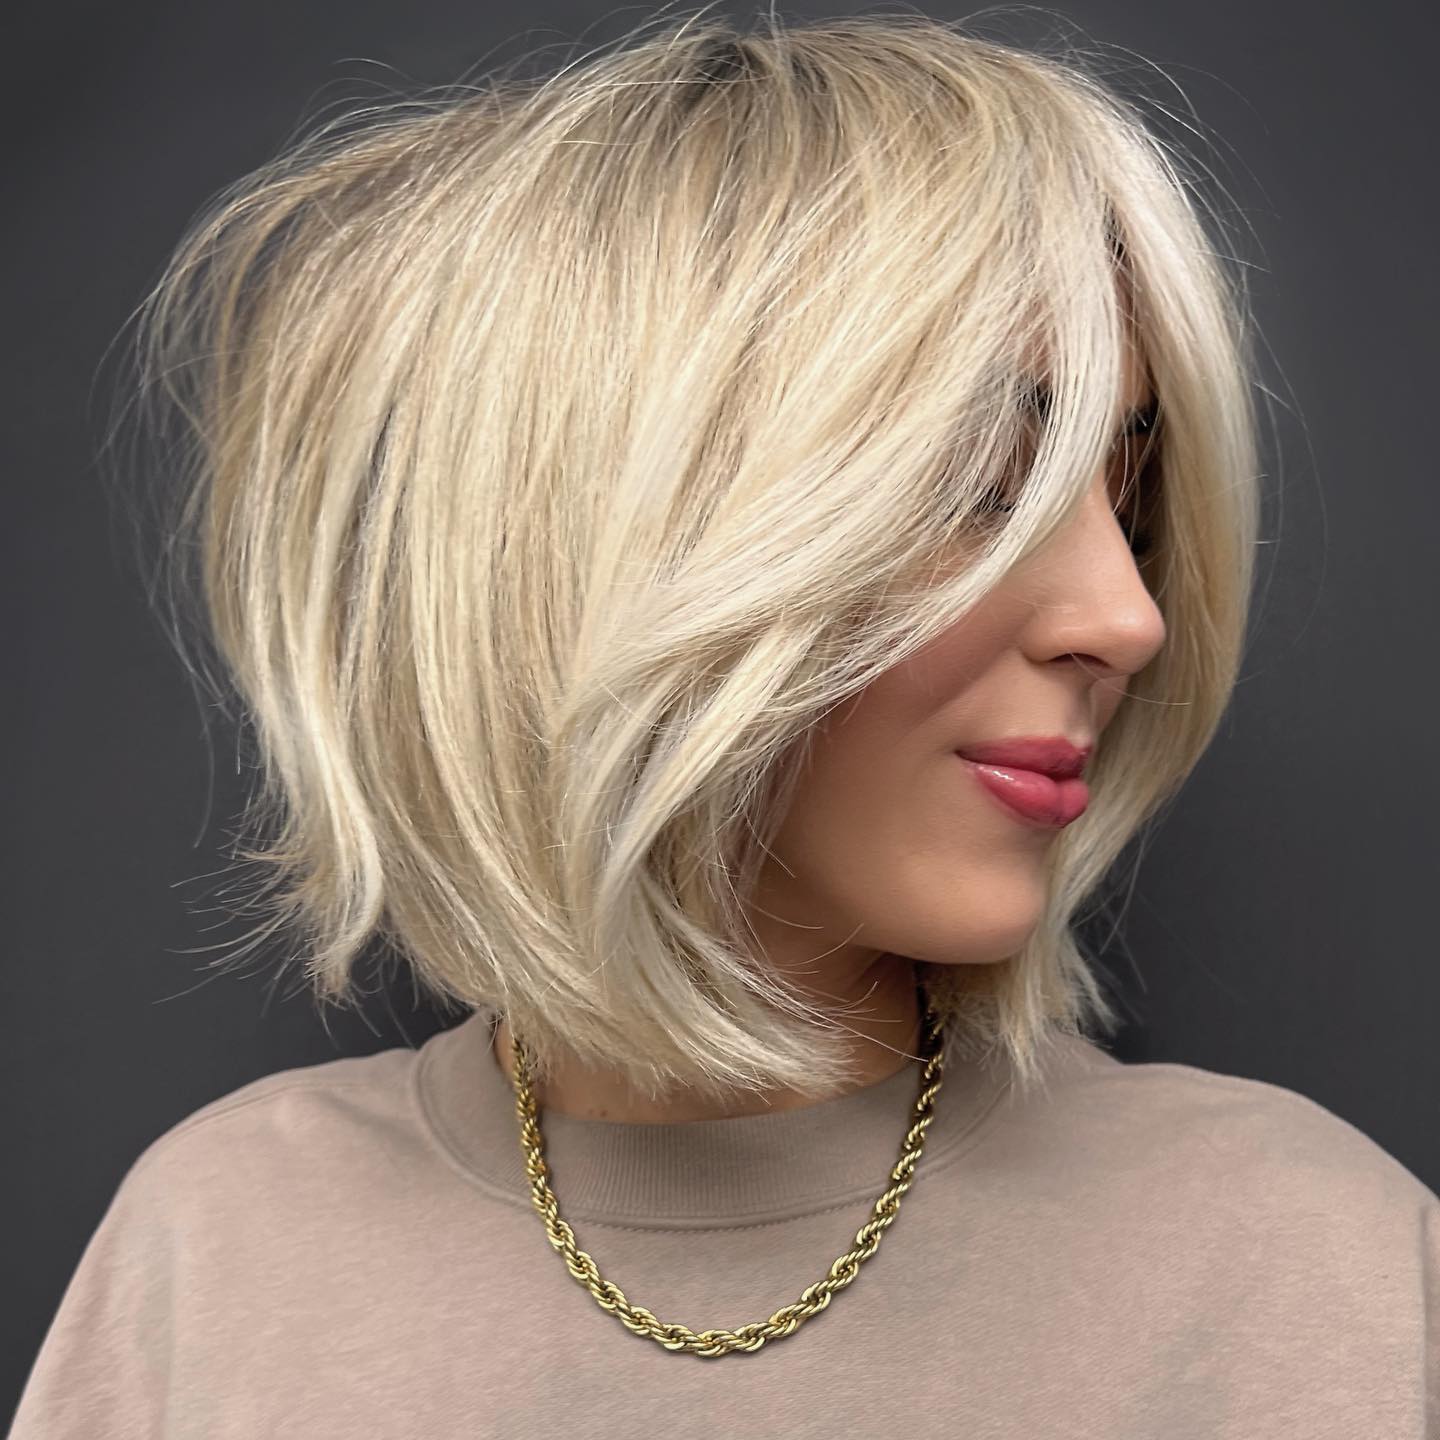 The Razor-Sharp Beauty of the Blunt Cut: 8 Trendy Variations